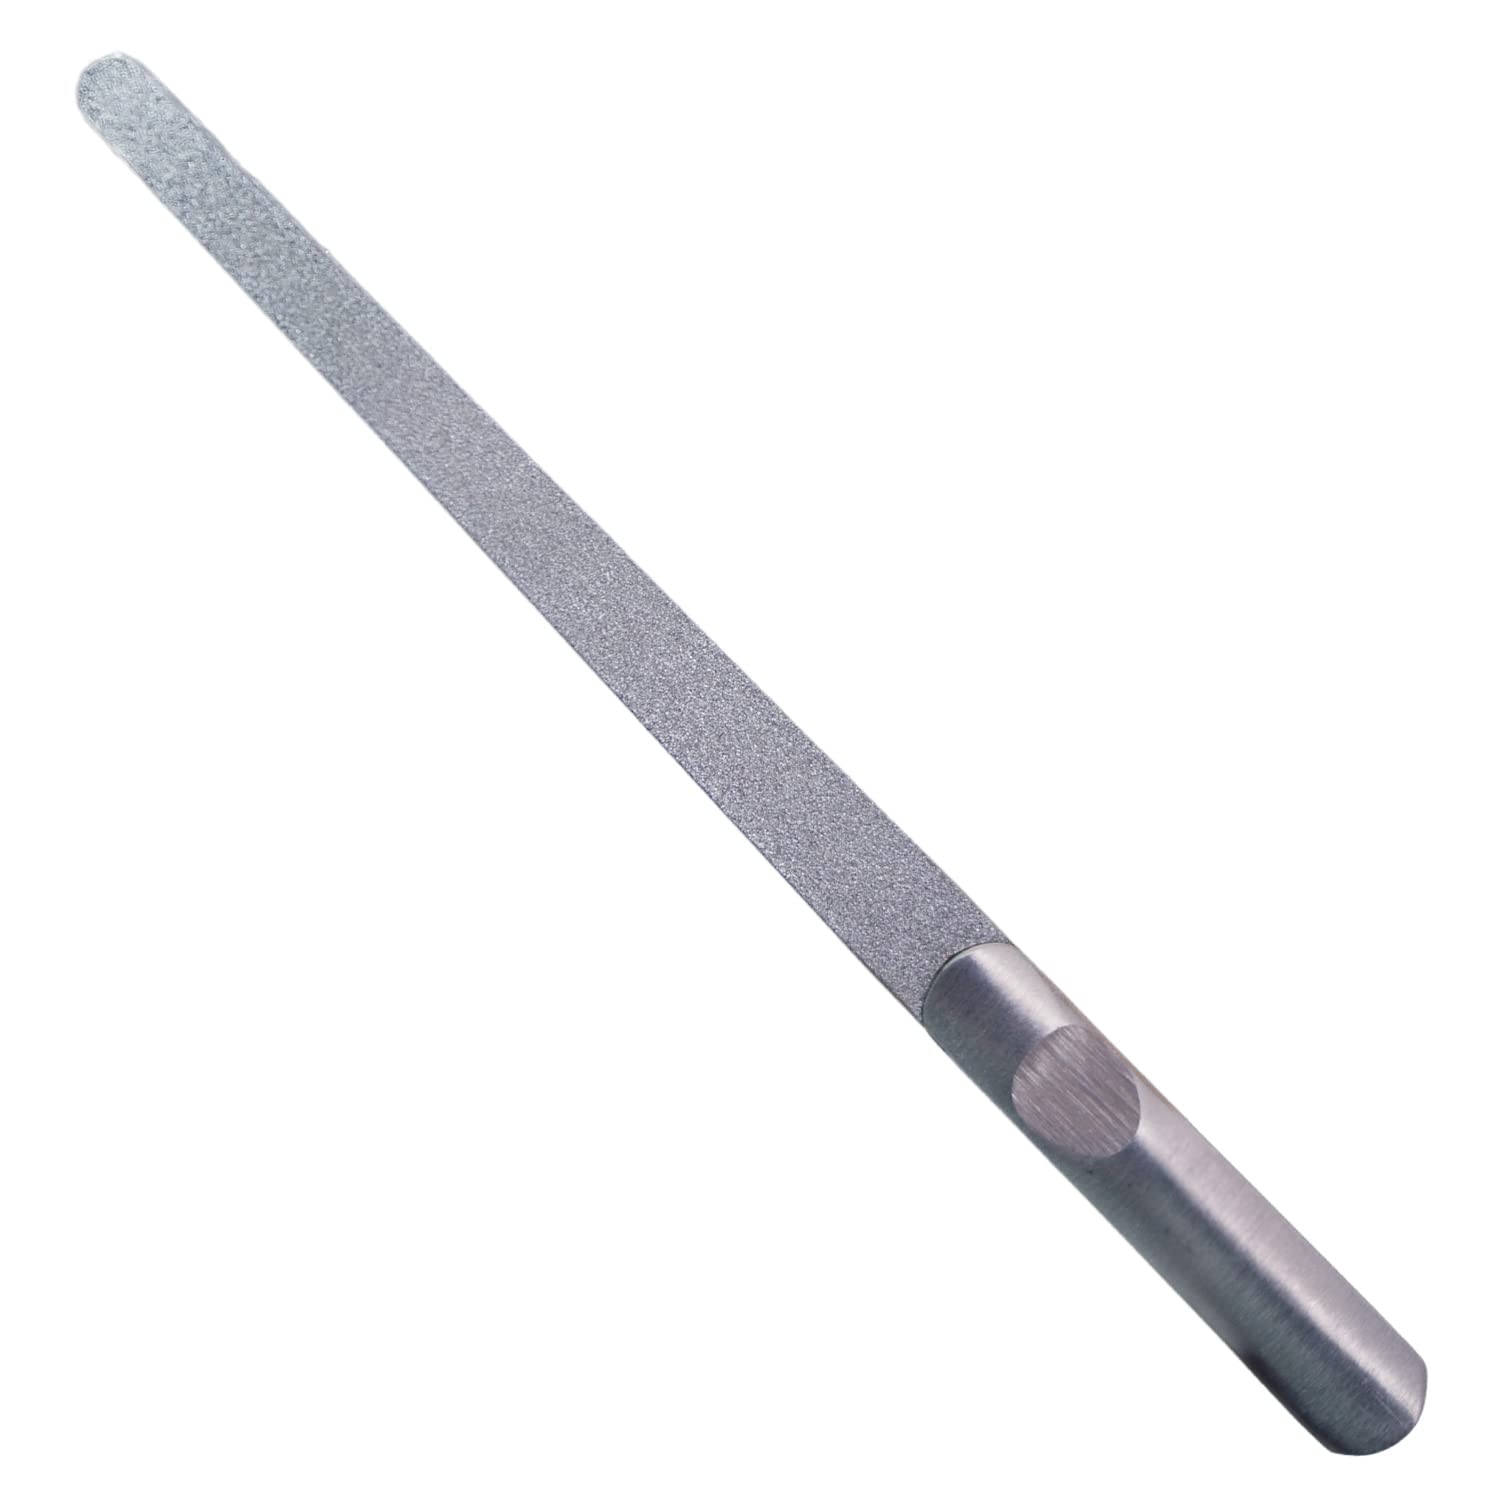 Midazzle Stainless Steel Nail Filer (Silver)